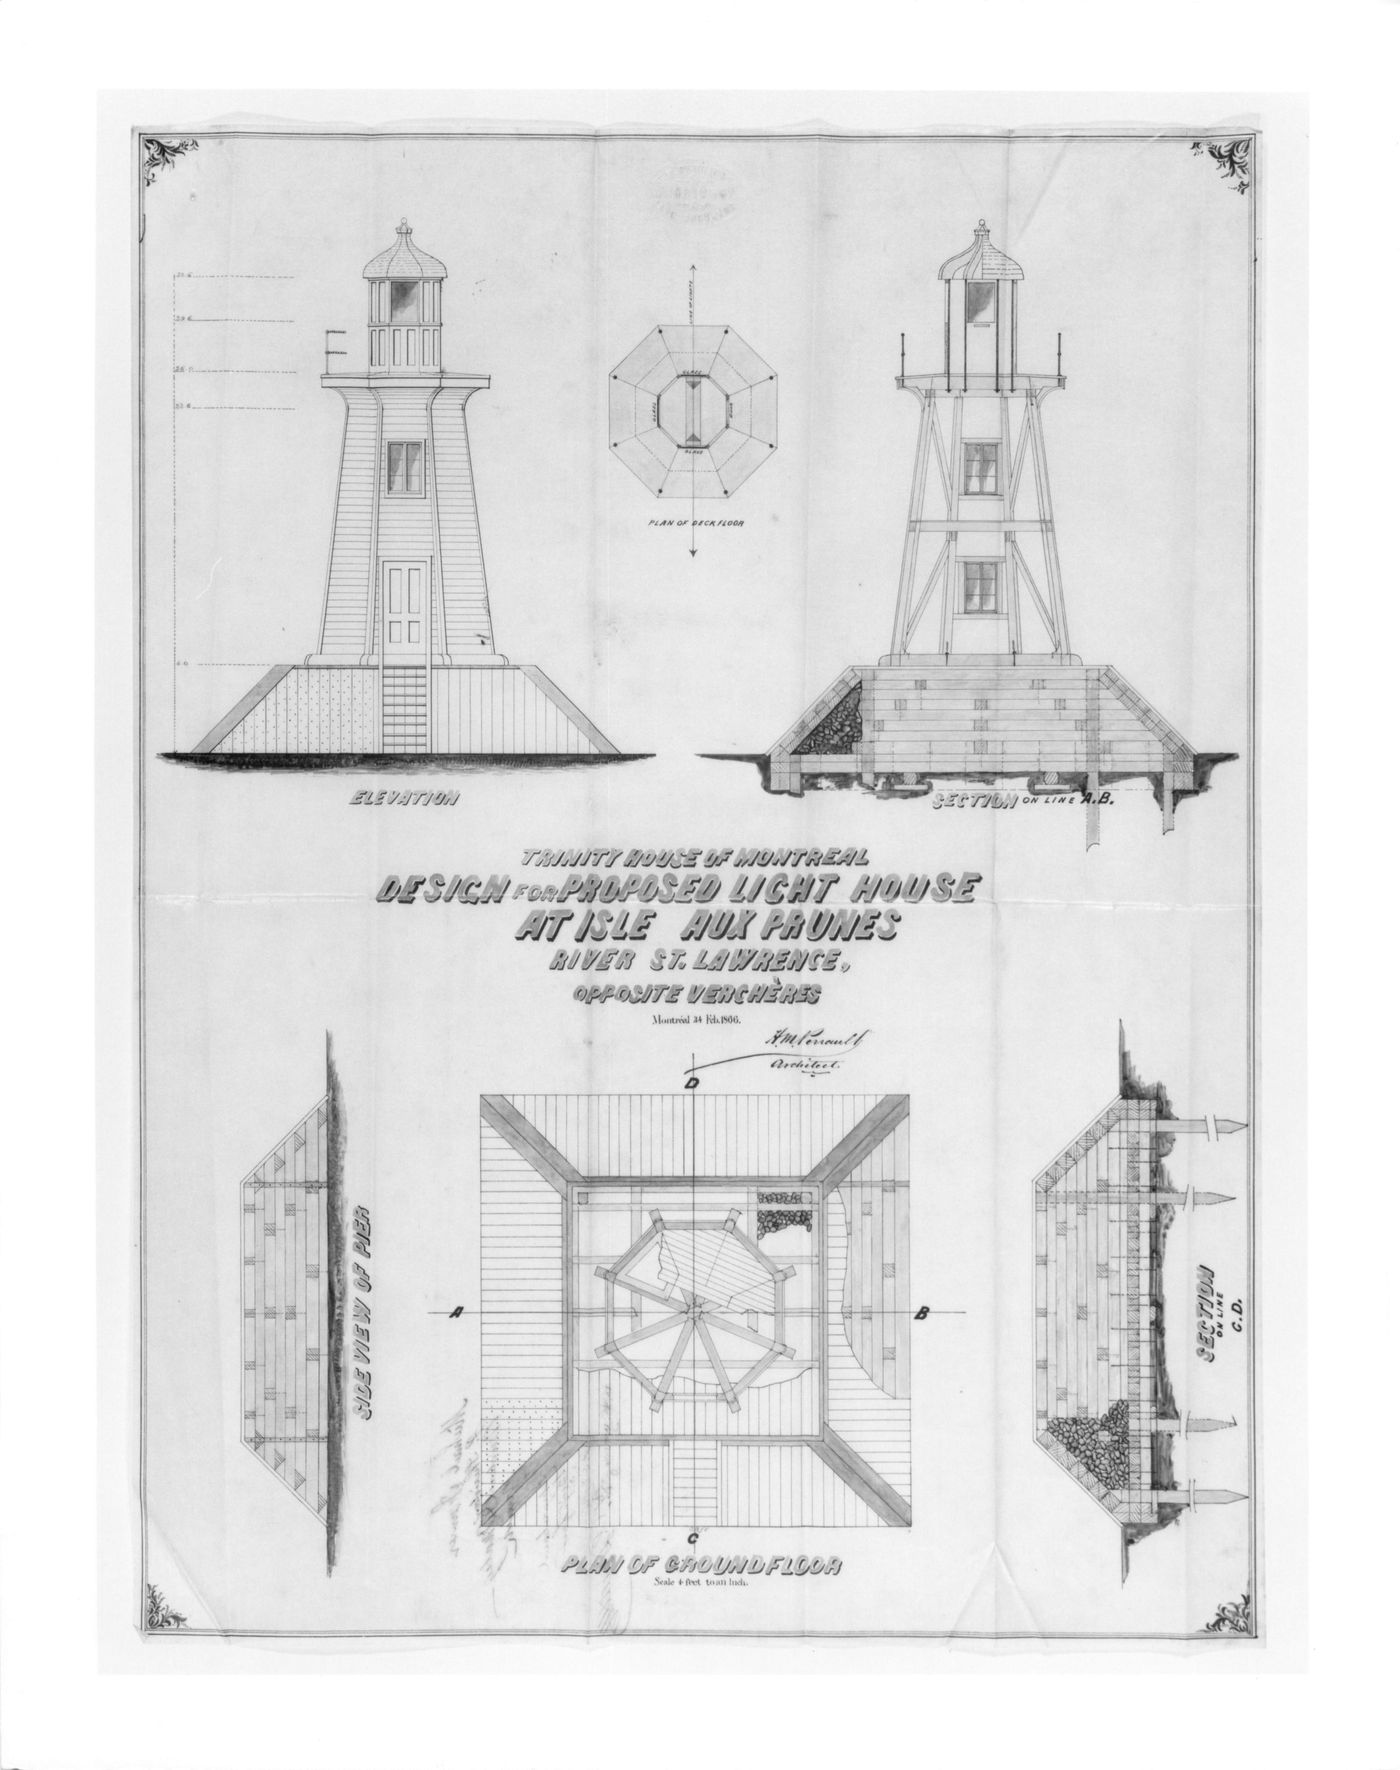 Elevation, plans, and sections for a lighthouse, Isle aux Prunes, St. Lawrence River, Verchères, Québec, Canada